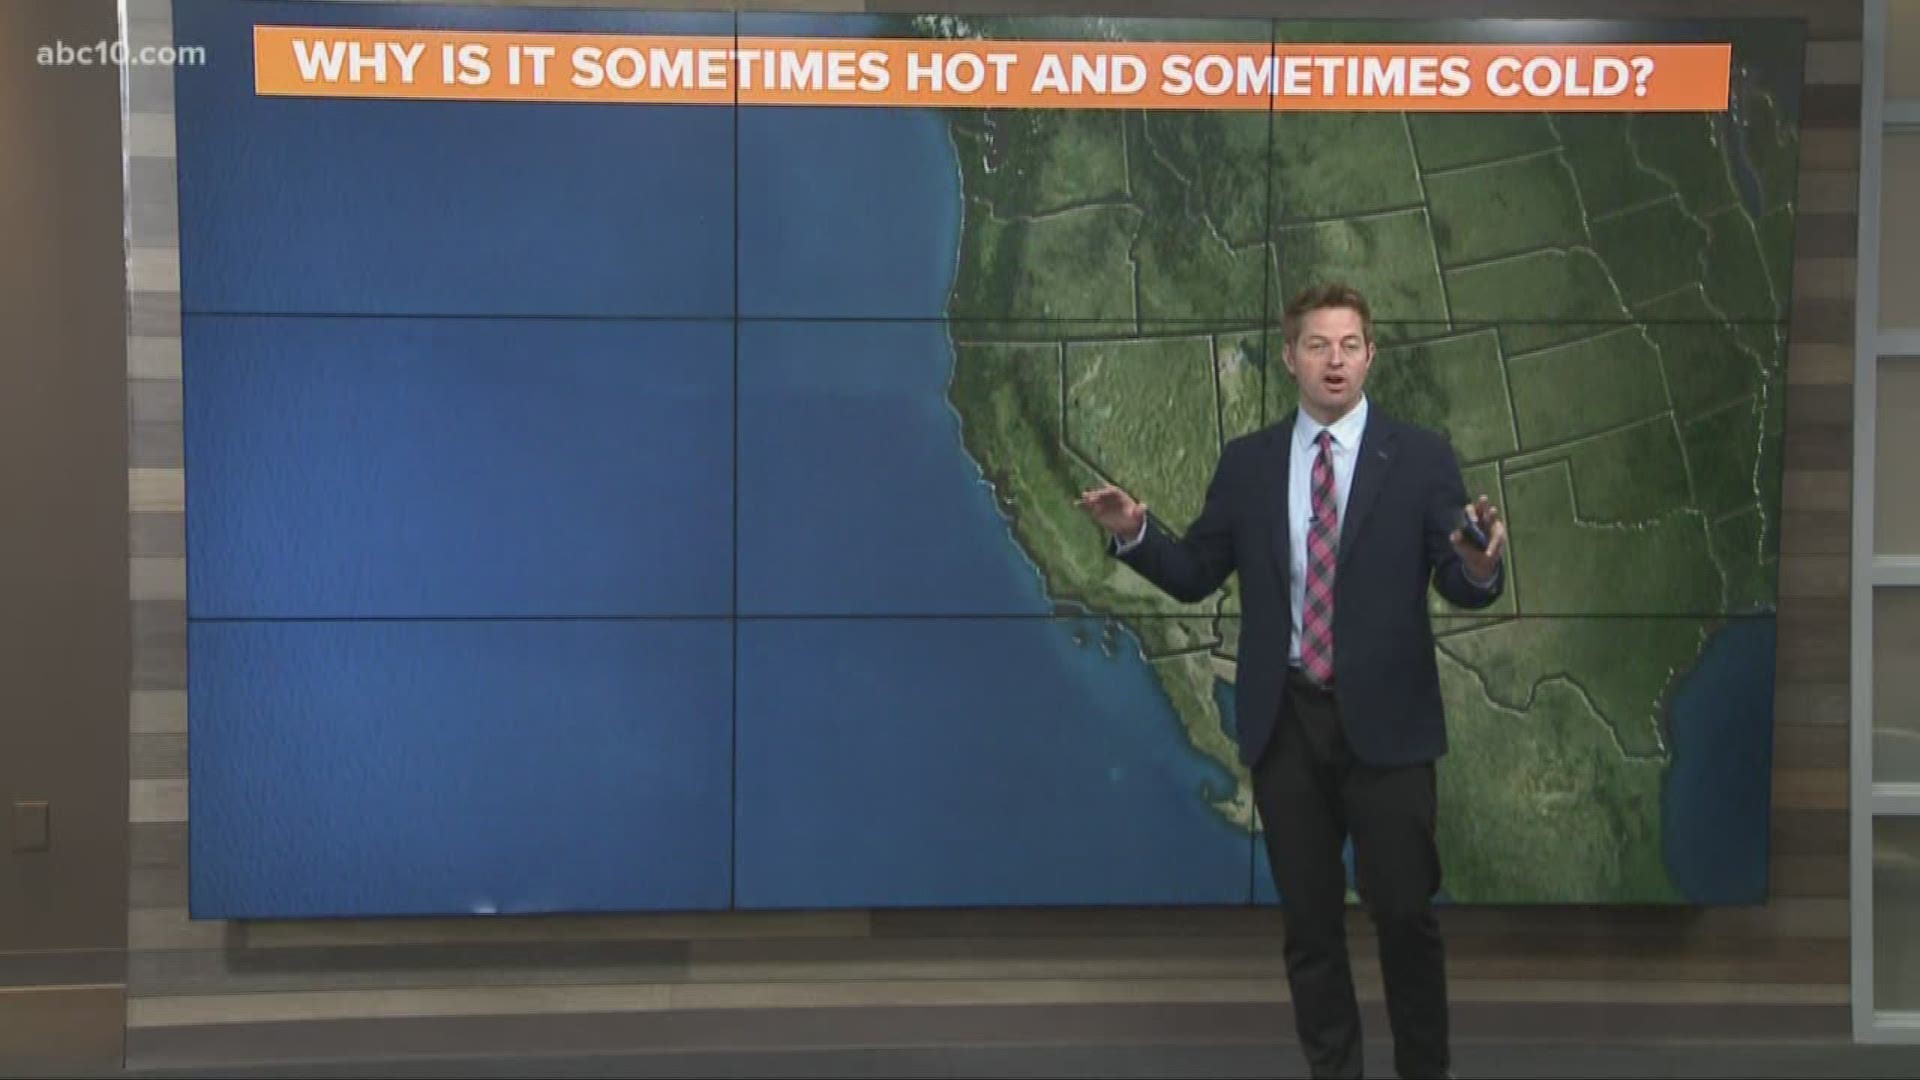 Rob explains why it's sometimes hot and why it's sometimes cold.